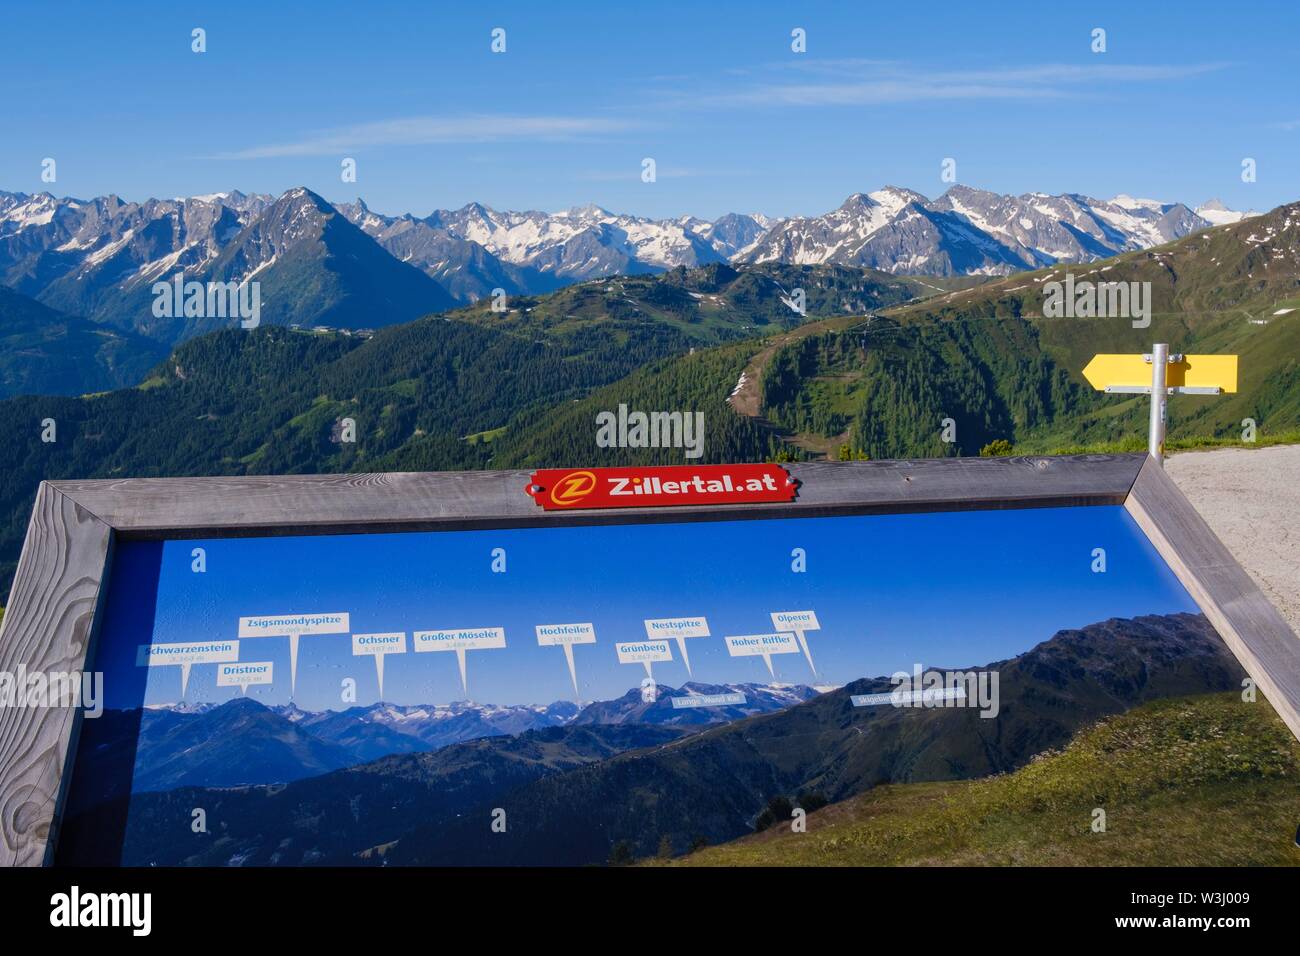 Information board with mountain panorama and peaks of the Zillertal Alps, view from Zillertaler Hohenstrasse, Zillertal, Tyrol, Austria Stock Photo